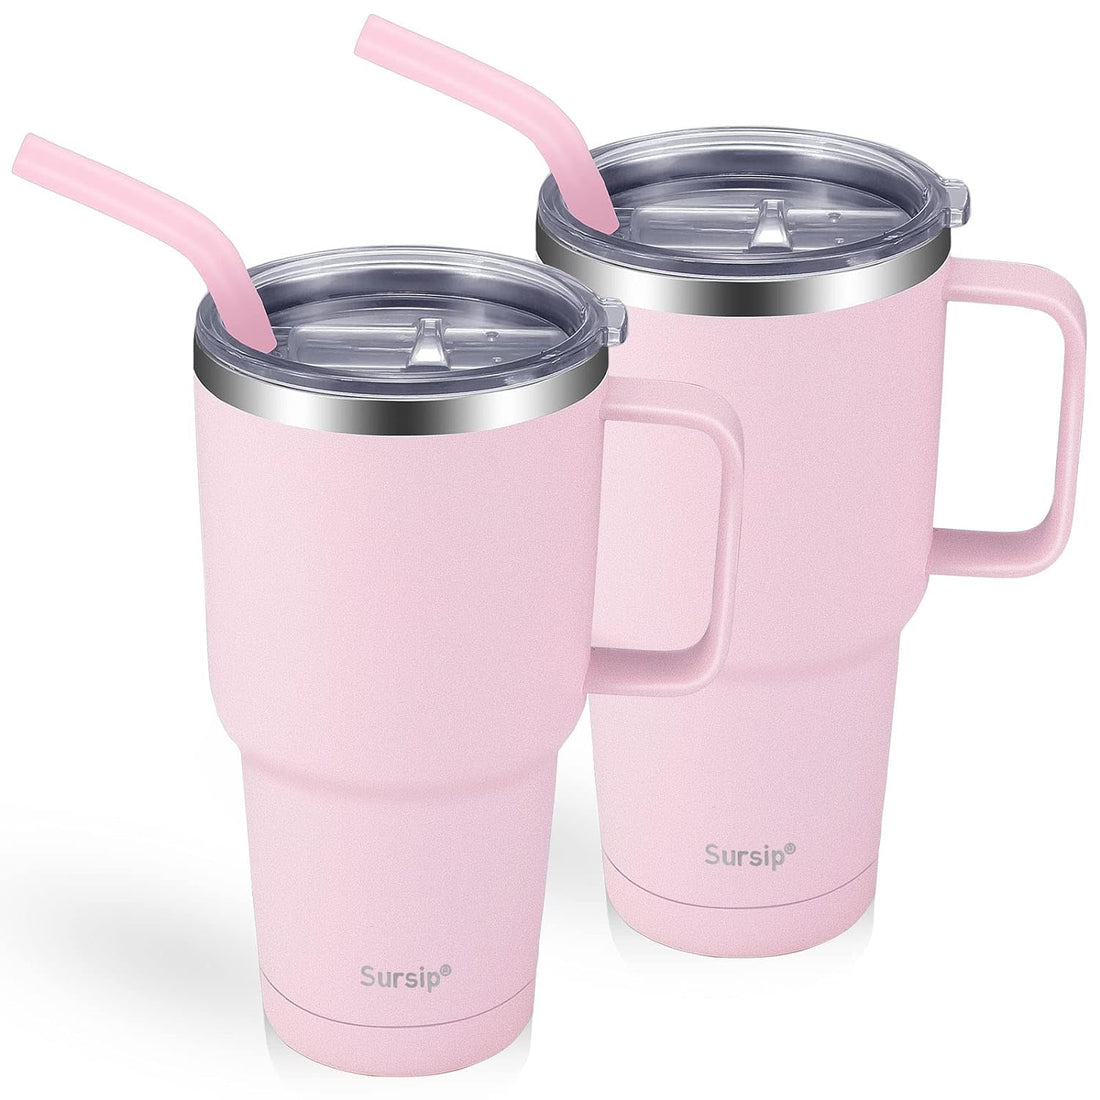 Sursip 30 oz Stainless Steel Cup,2 PackDouble Wall Vacuum Insulated Water Tumbler With Straw,Office Cup with Handle/Lid/Brush,Coffee Mug Travel Cup For Water（Pink）